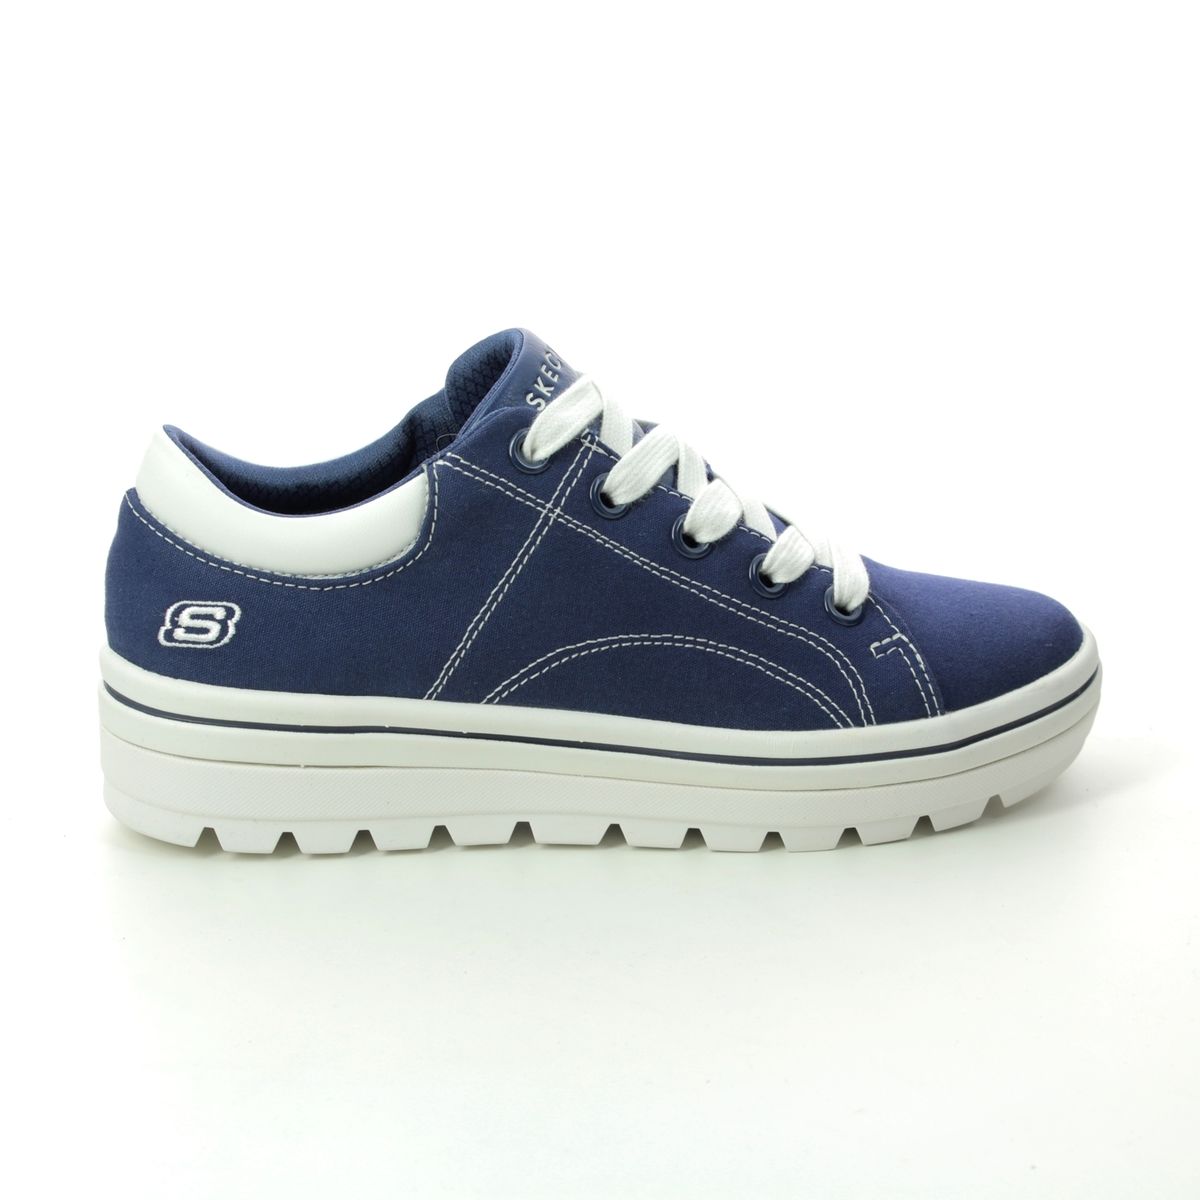 Skechers Bring It Back 74100 NVY Navy trainers